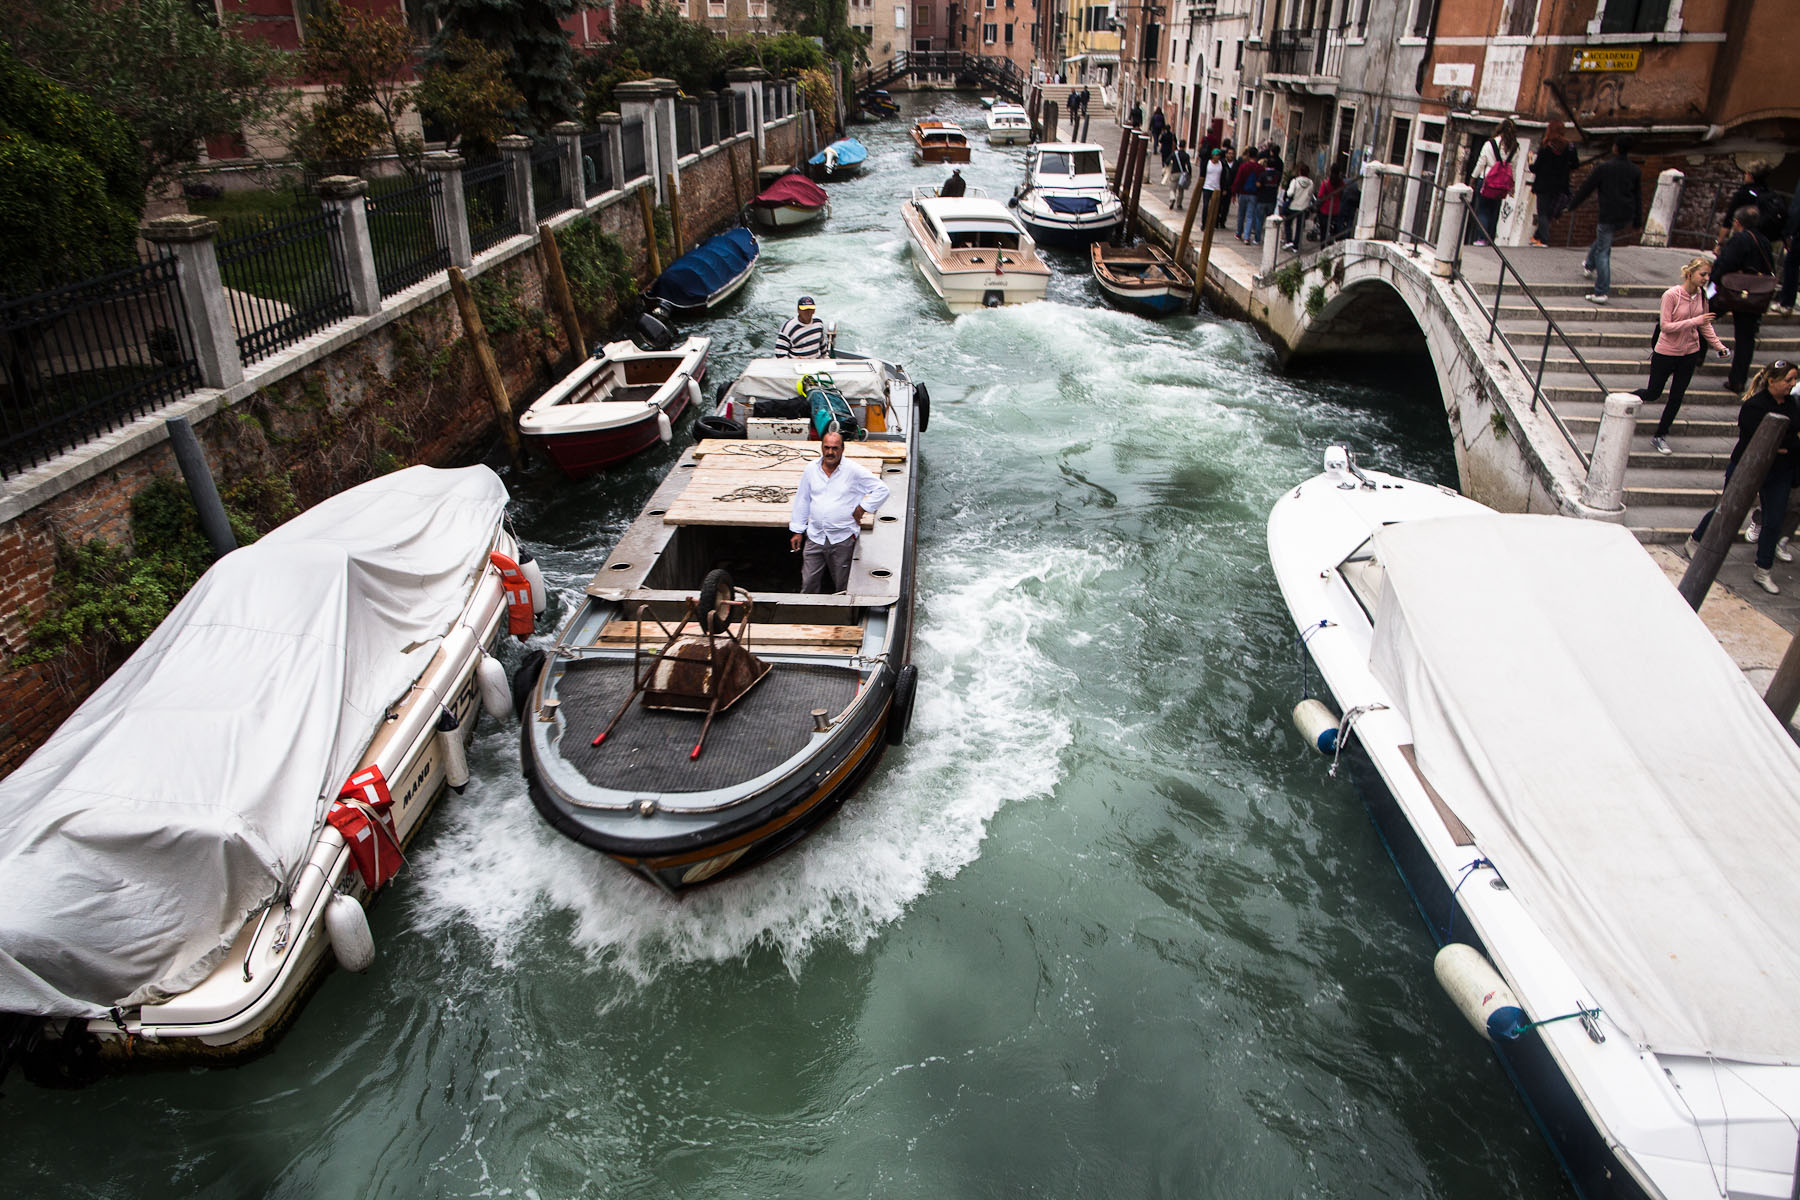 Heavy traffic in the narrow canals of the city of Venice displaces a lot of water and causes strong wave action. Continuous striking of waves against the facades causes damage to the buildings, destabilizes them and weakens the foundations.